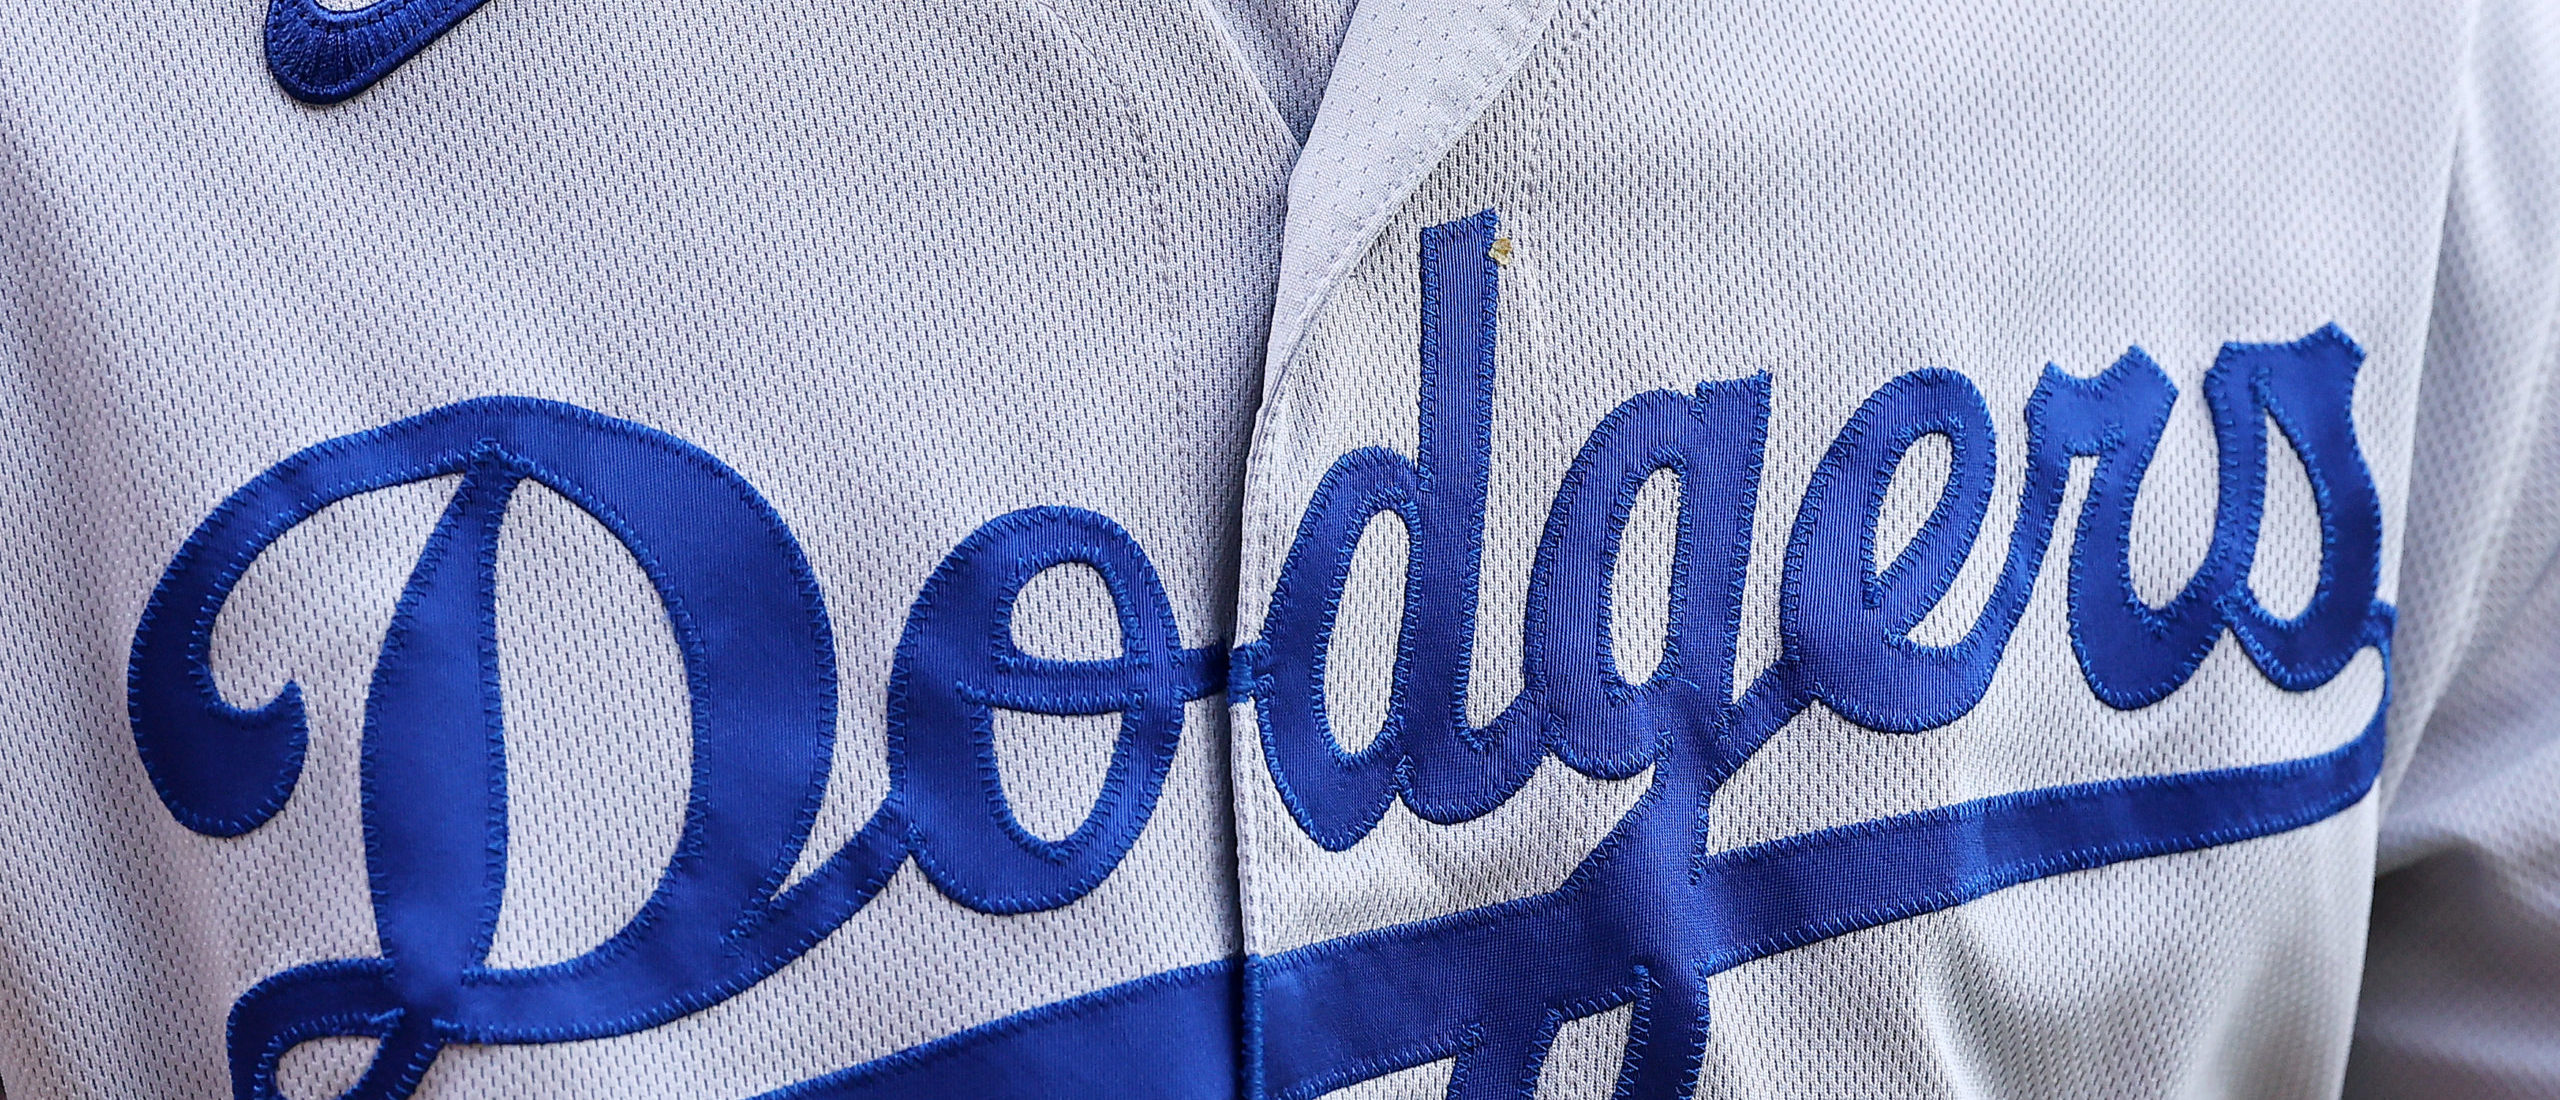 Dodgers bring back Christian Faith and Family Day after drag controversy